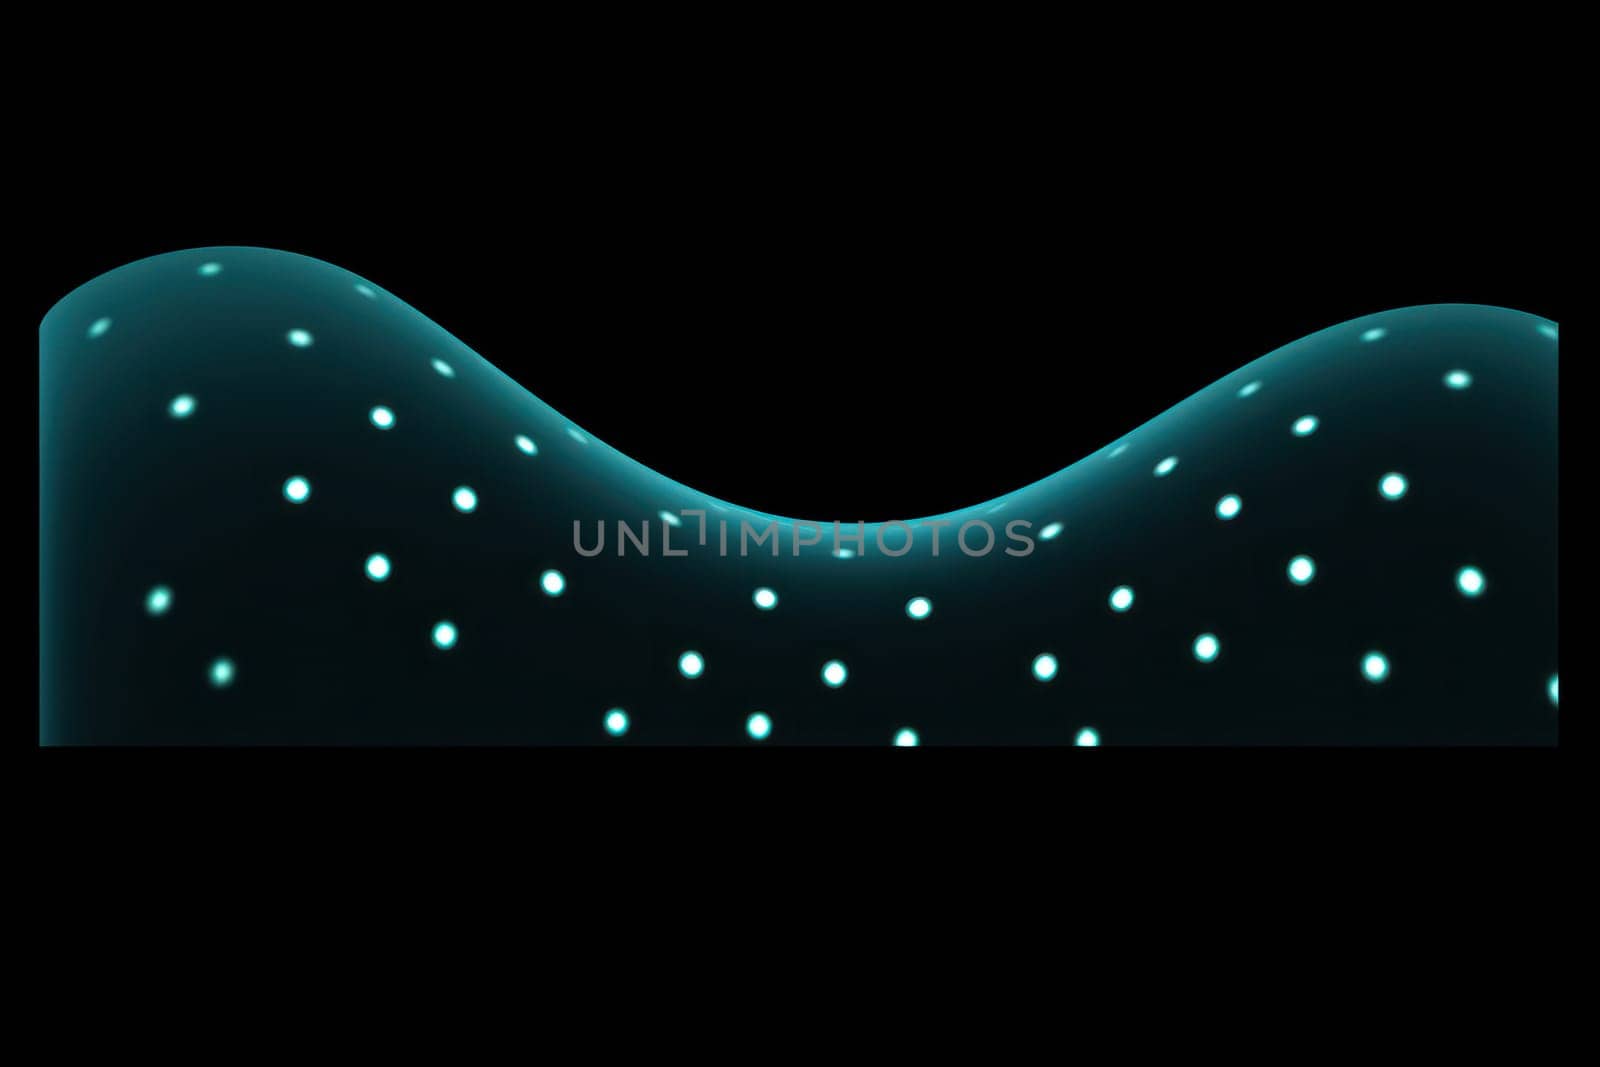 Abstract Light: Futuristic Blue Wave - A Digital Design Illustration with Graphic Curve. by Vichizh